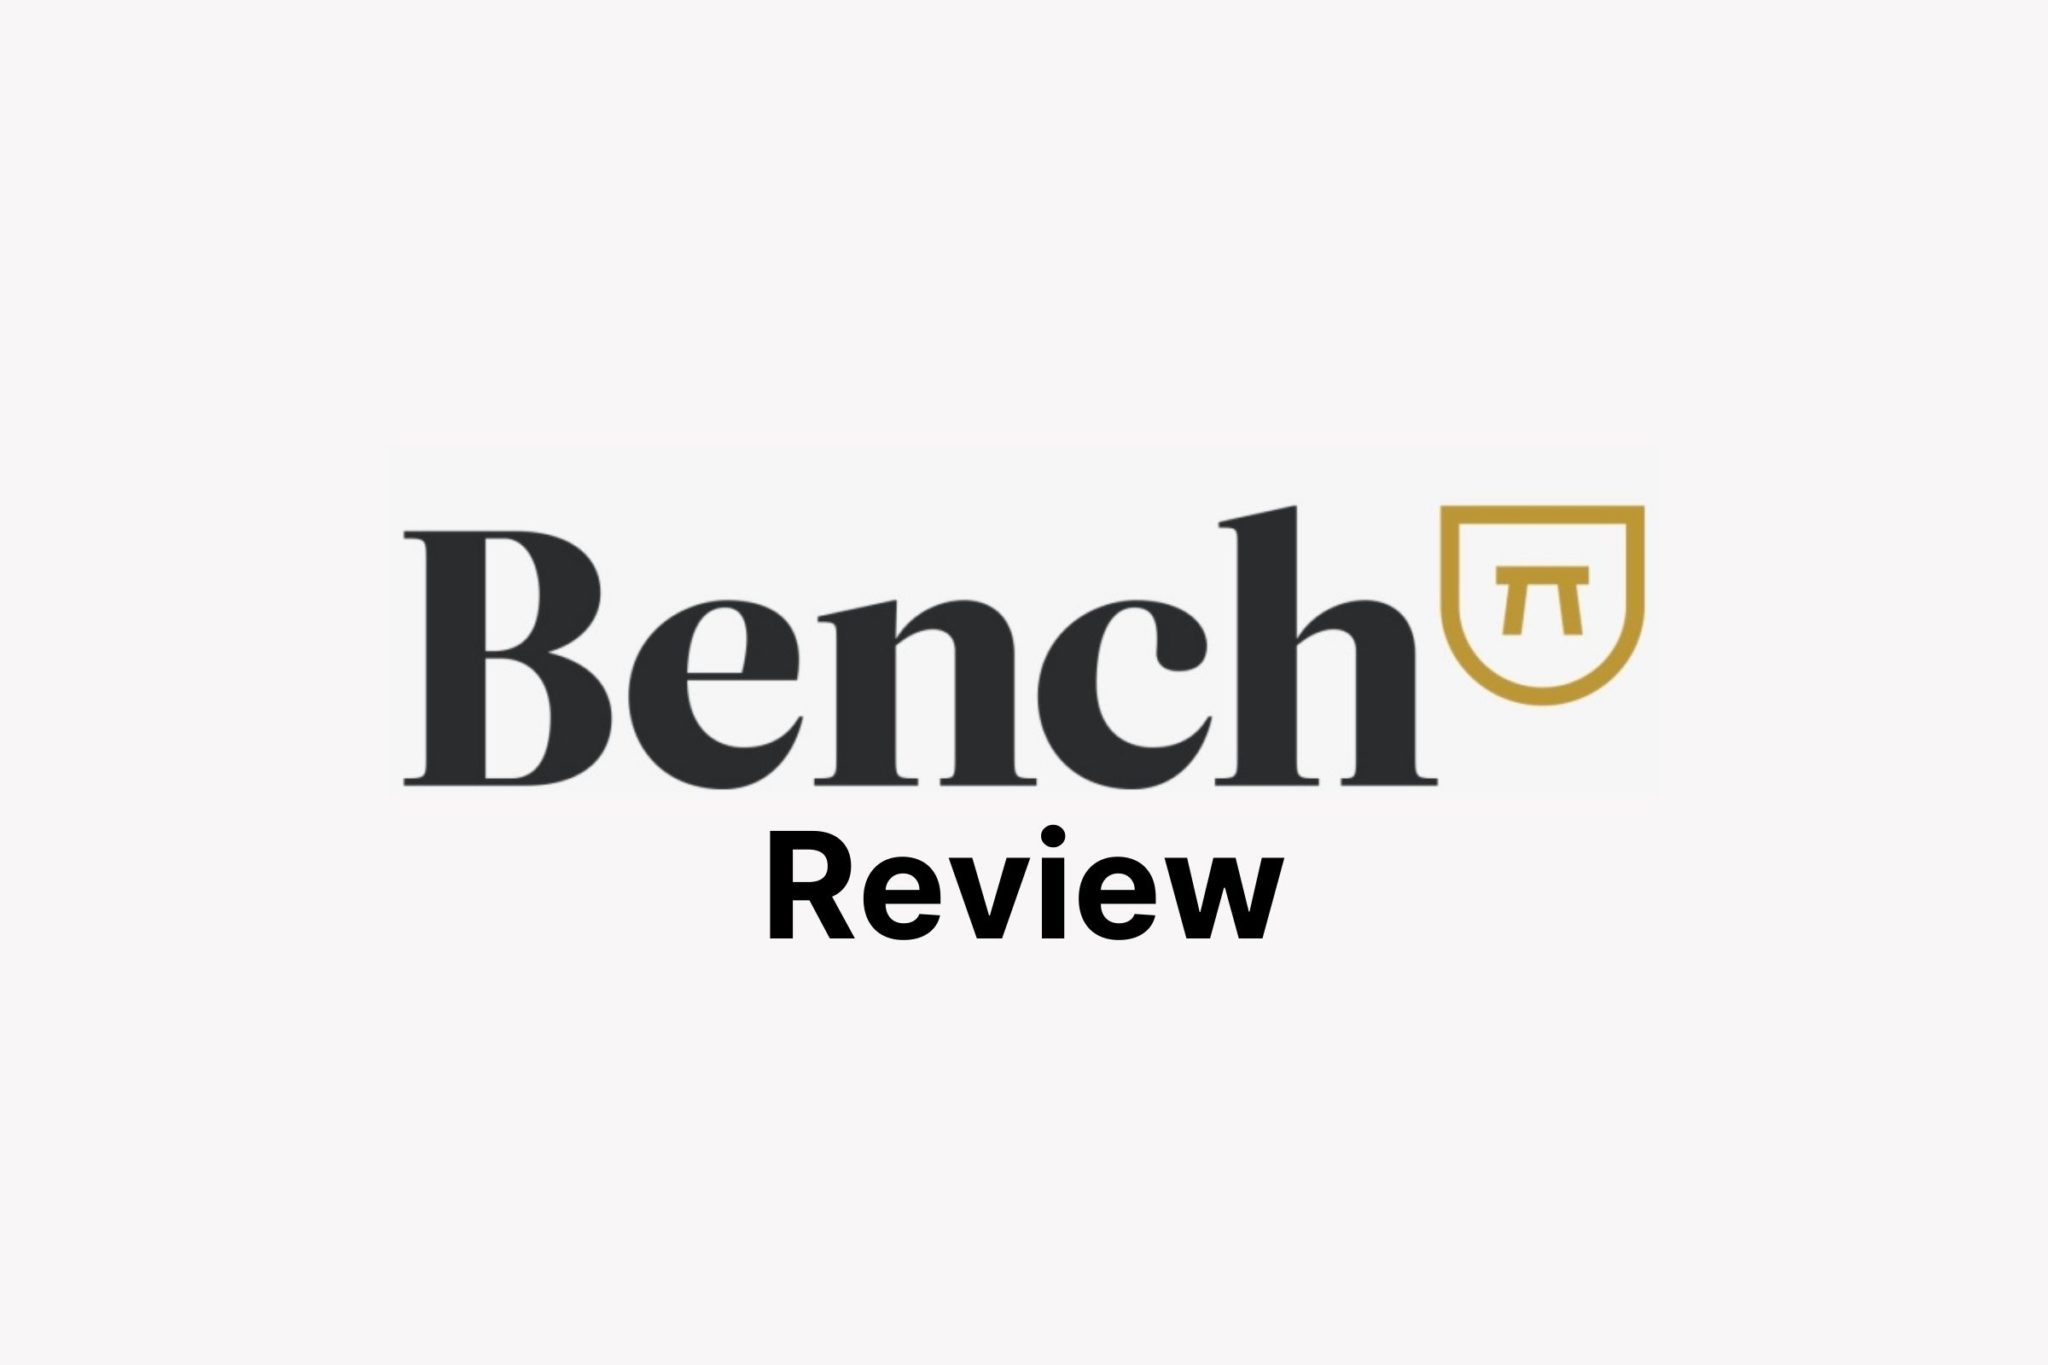 Review of Bench Software